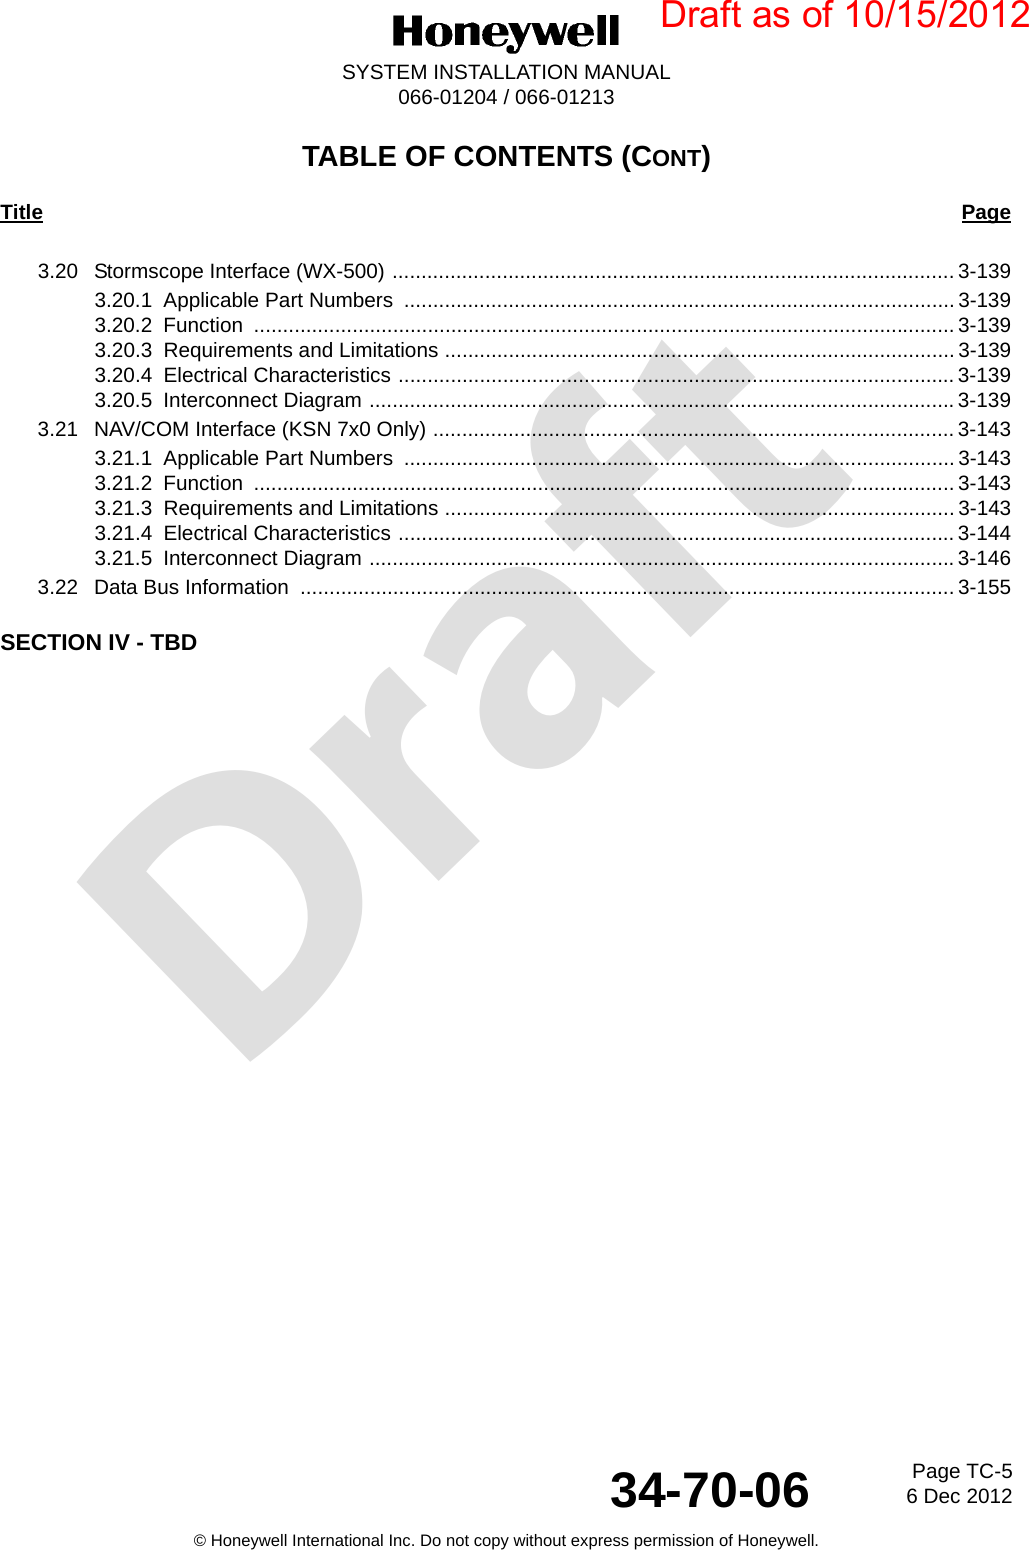 DraftPage TC-56 Dec 201234-70-06SYSTEM INSTALLATION MANUAL066-01204 / 066-01213© Honeywell International Inc. Do not copy without express permission of Honeywell.TABLE OF CONTENTS (CONT)Title Page3.20 Stormscope Interface (WX-500) ................................................................................................. 3-1393.20.1 Applicable Part Numbers  ............................................................................................... 3-1393.20.2 Function ......................................................................................................................... 3-1393.20.3 Requirements and Limitations ........................................................................................ 3-1393.20.4 Electrical Characteristics ................................................................................................ 3-1393.20.5 Interconnect Diagram .....................................................................................................3-1393.21 NAV/COM Interface (KSN 7x0 Only) .......................................................................................... 3-1433.21.1 Applicable Part Numbers  ............................................................................................... 3-1433.21.2 Function ......................................................................................................................... 3-1433.21.3 Requirements and Limitations ........................................................................................ 3-1433.21.4 Electrical Characteristics ................................................................................................ 3-1443.21.5 Interconnect Diagram .....................................................................................................3-1463.22 Data Bus Information  ................................................................................................................. 3-155SECTION IV - TBDDraft as of 10/15/2012